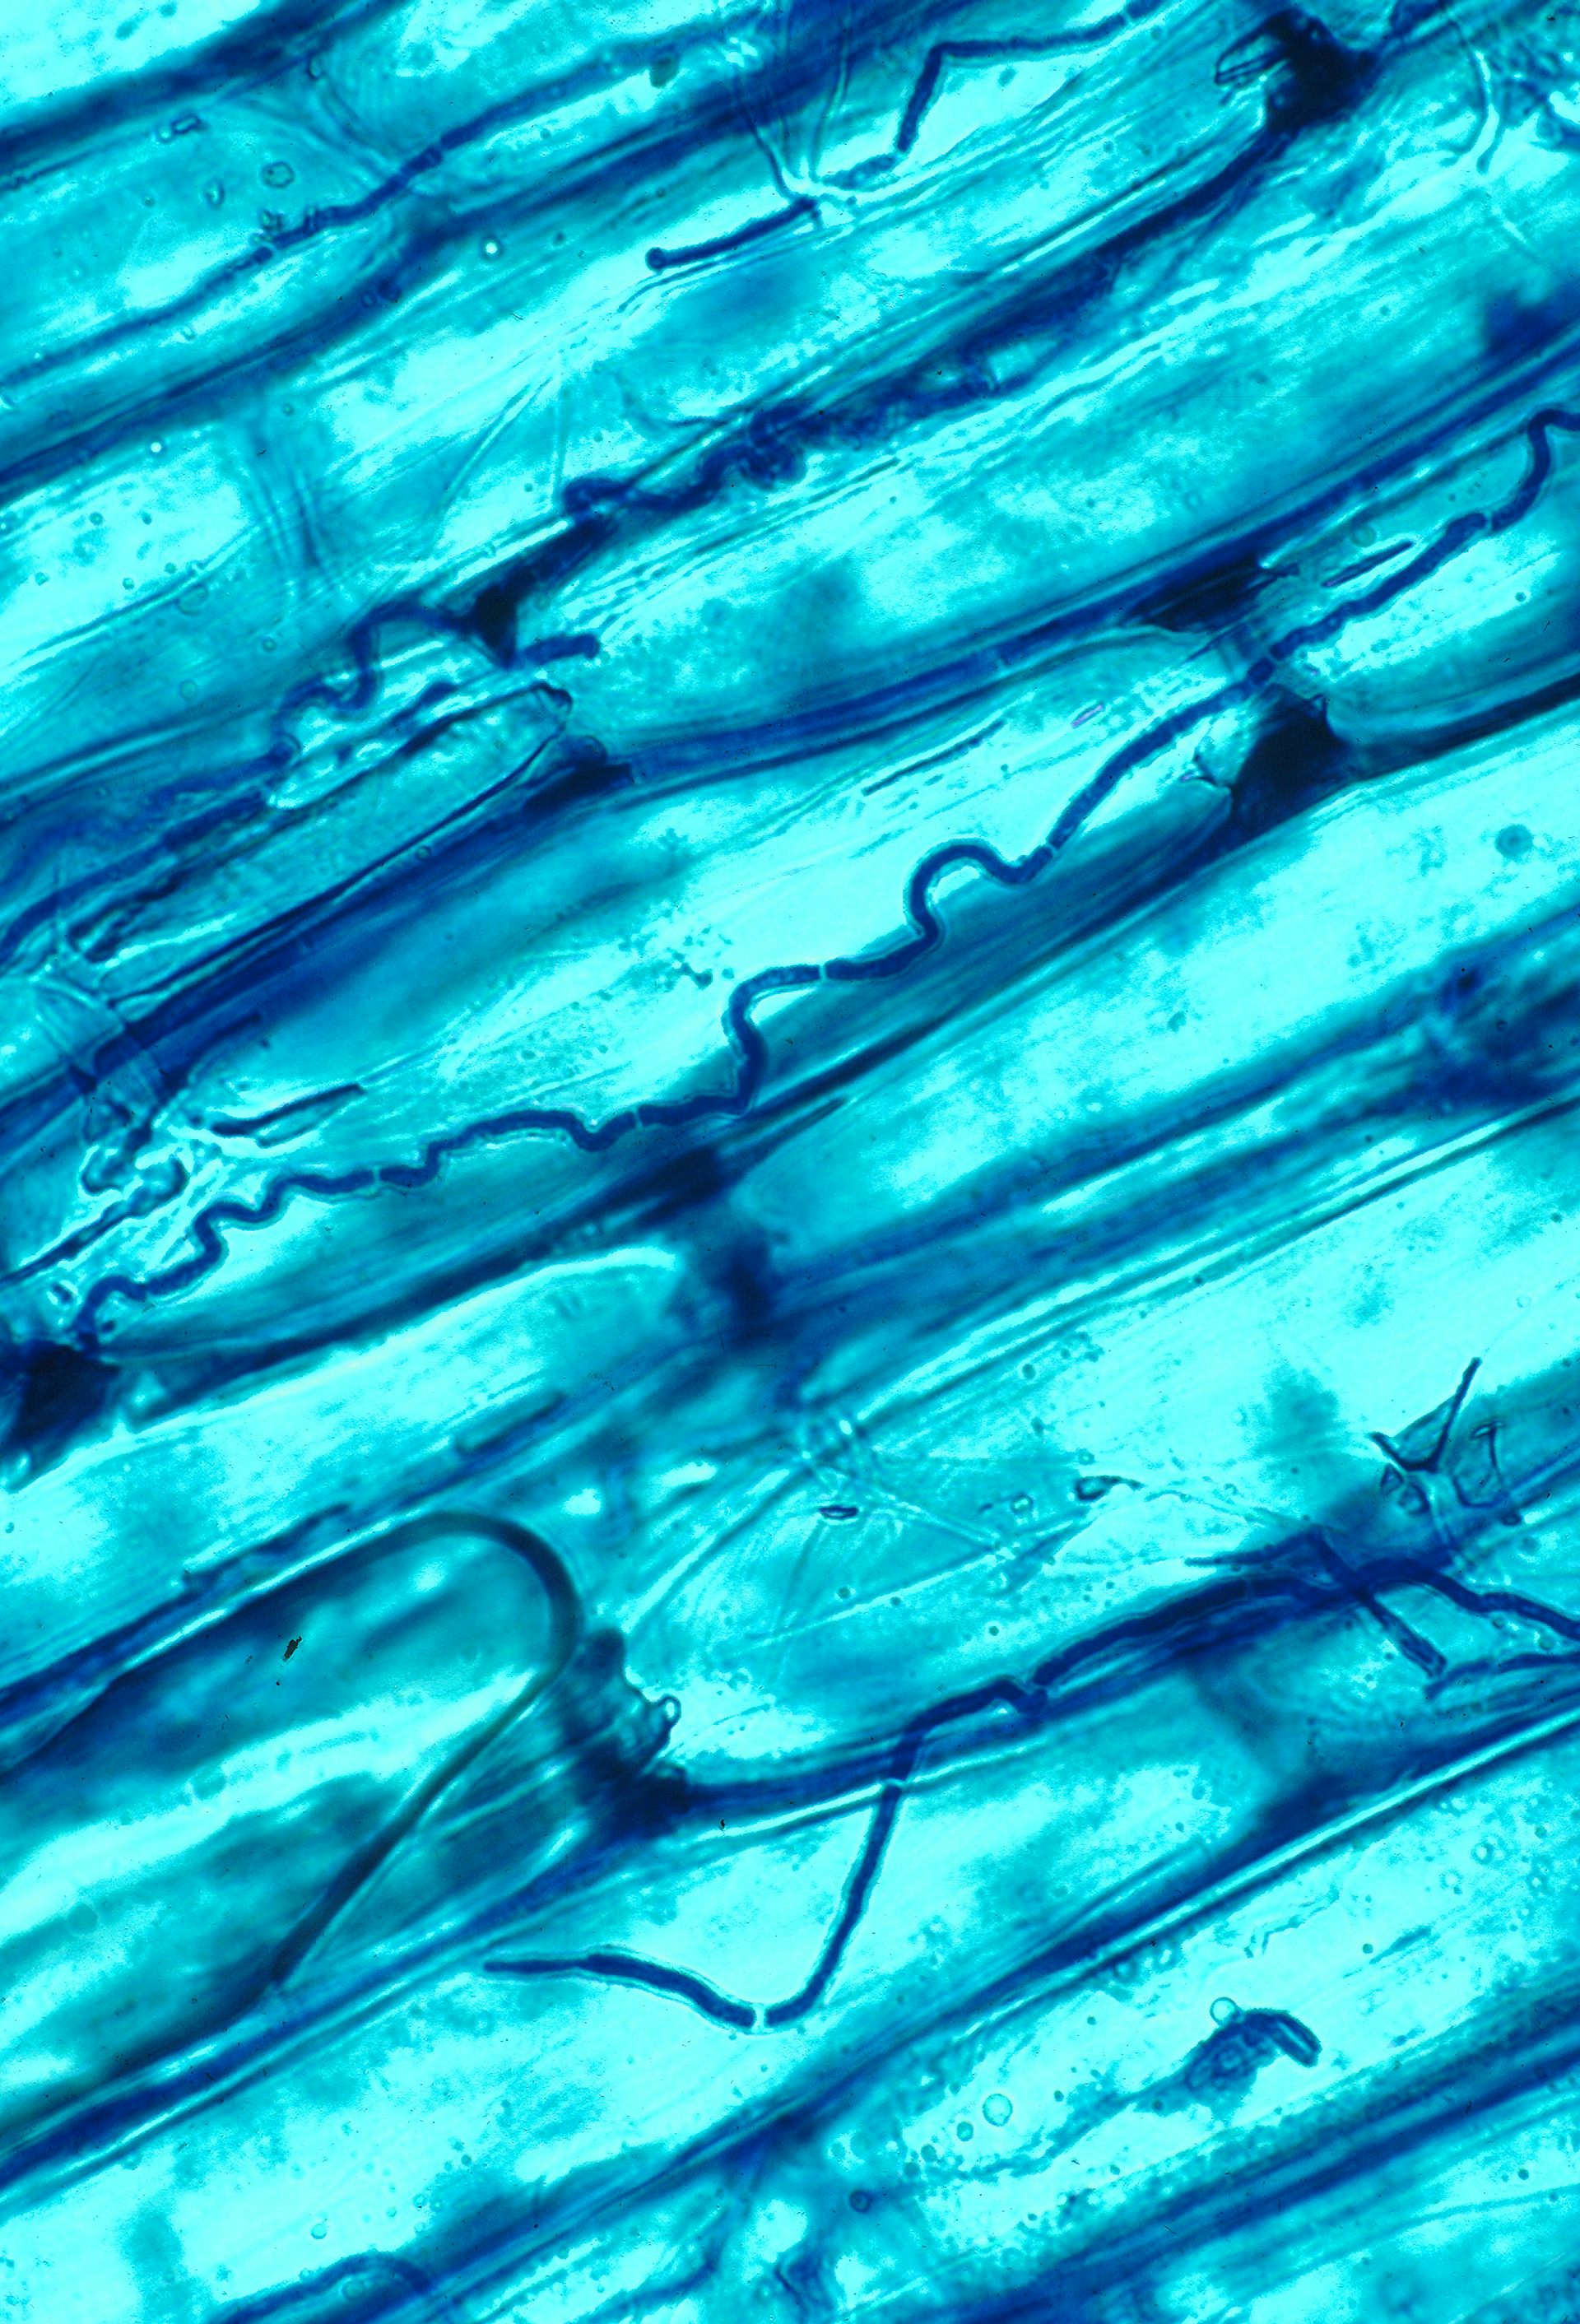 A microscopic organisms stained blue